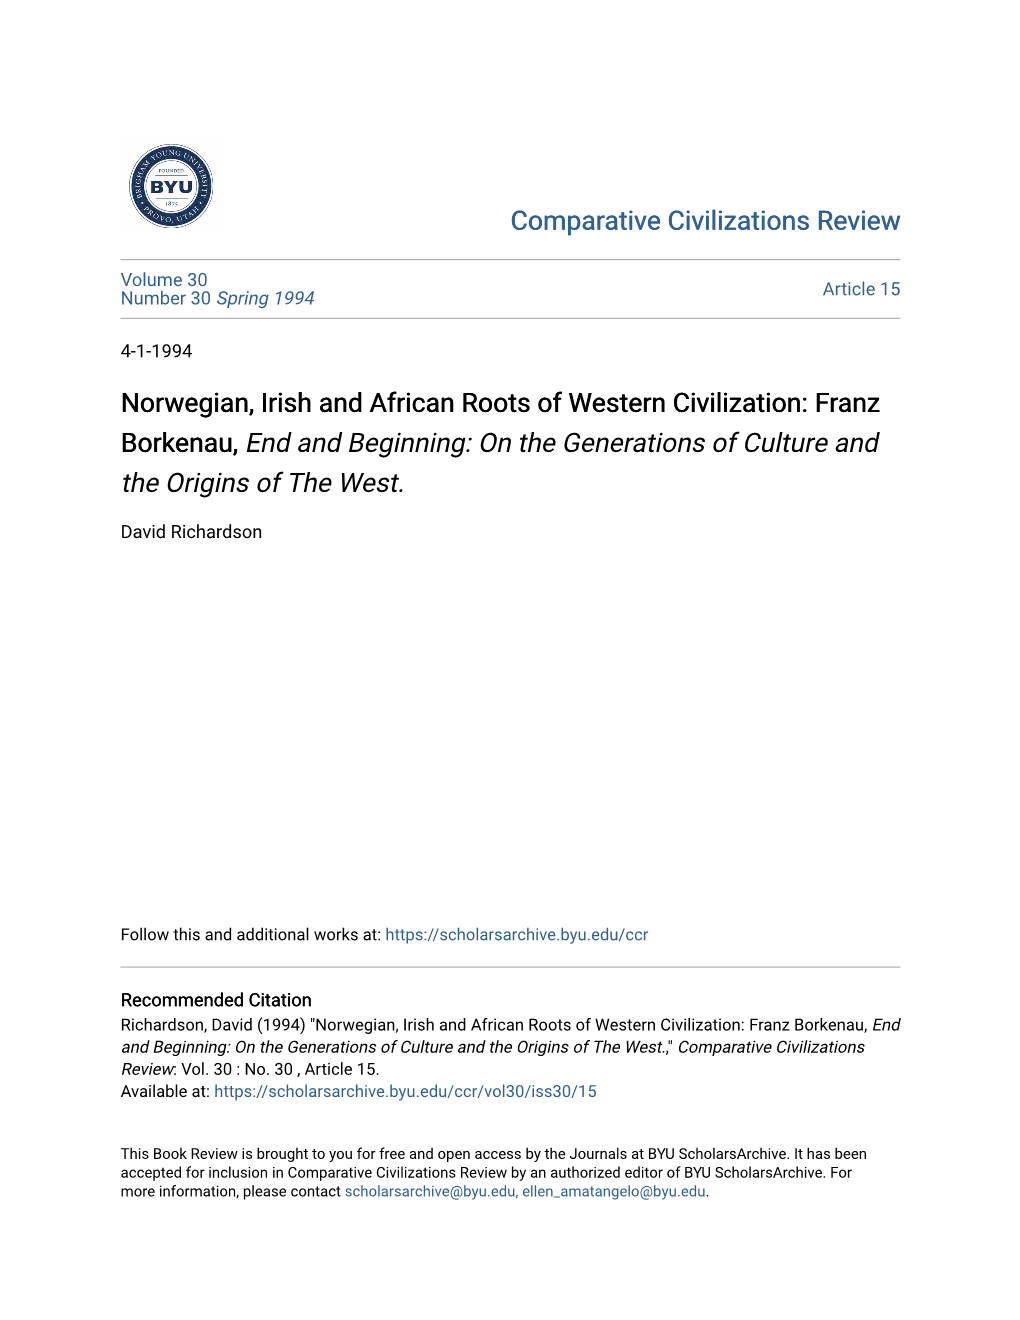 Norwegian, Irish and African Roots of Western Civilization: Franz Borkenau, End and Beginning: on the Generations of Culture and the Origins of the West